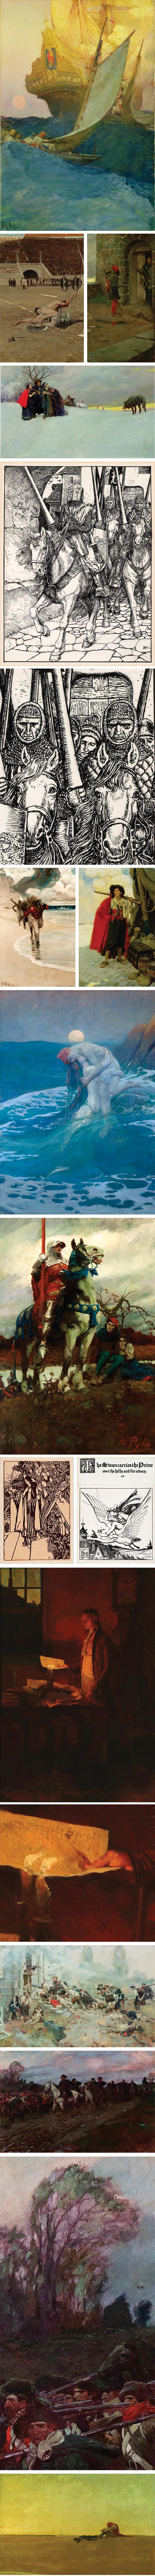 Howard Pyle: American Master Rediscovered